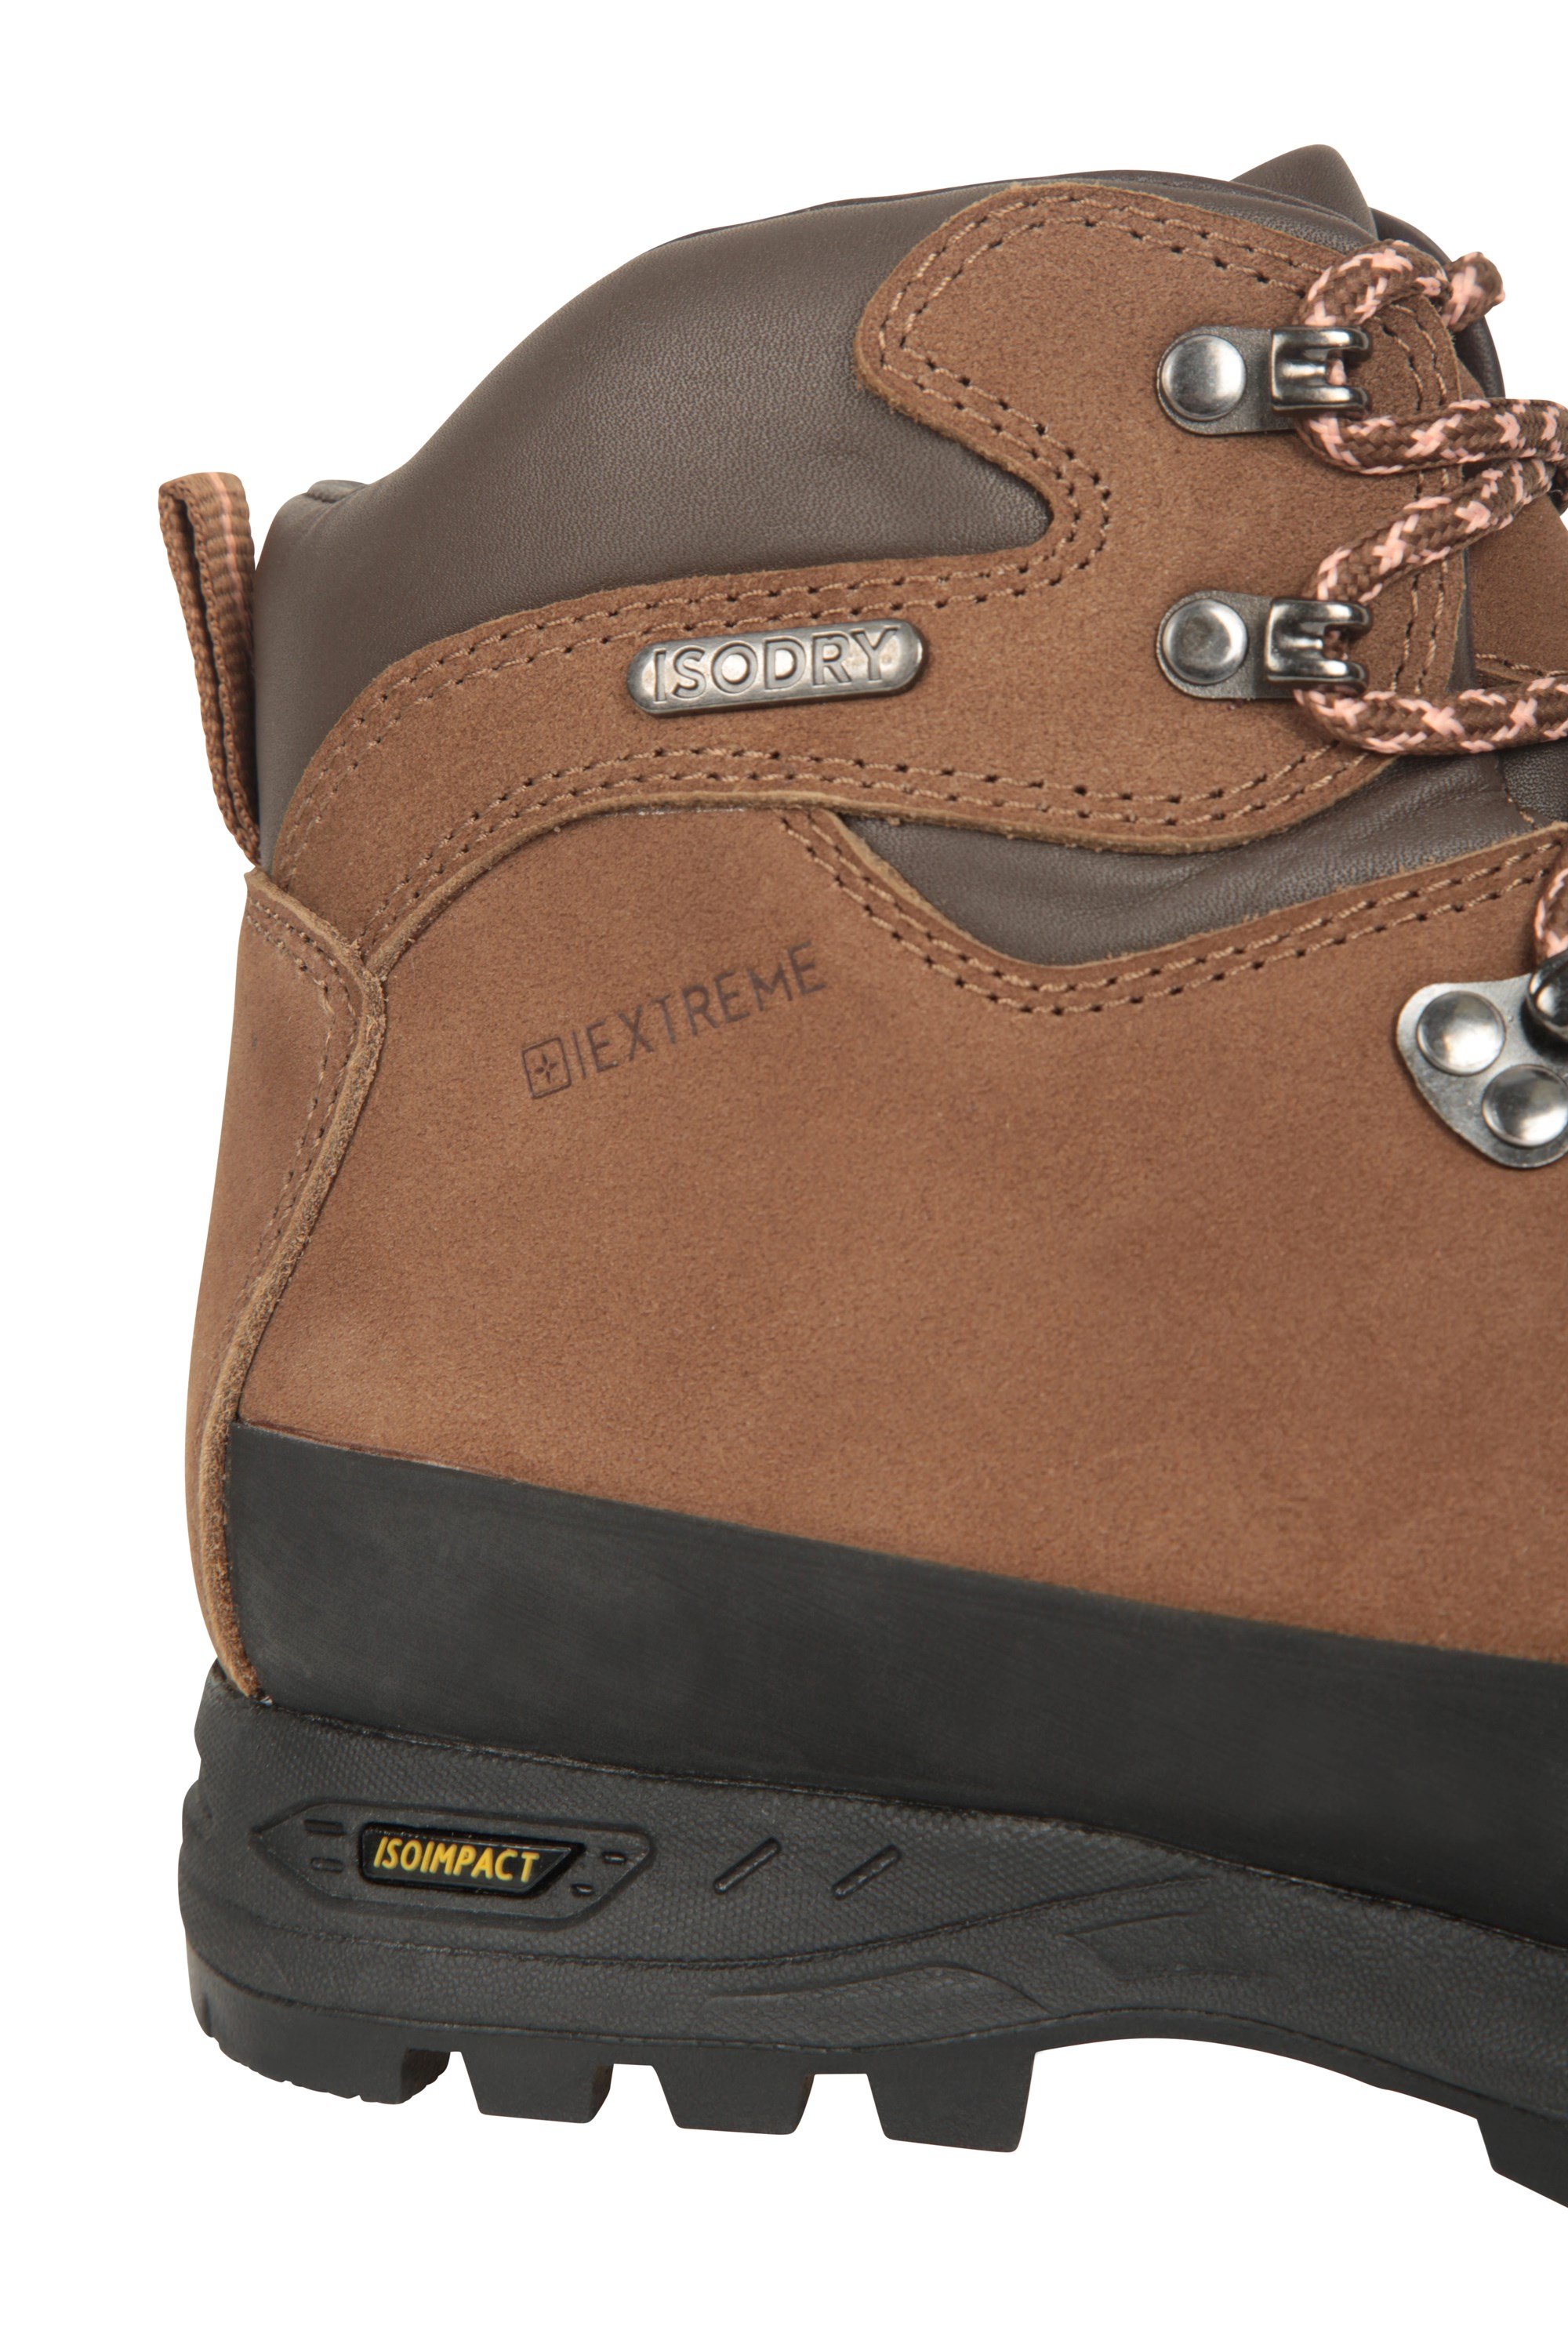 Extreme Quest Womens Waterproof Isogrip Boots